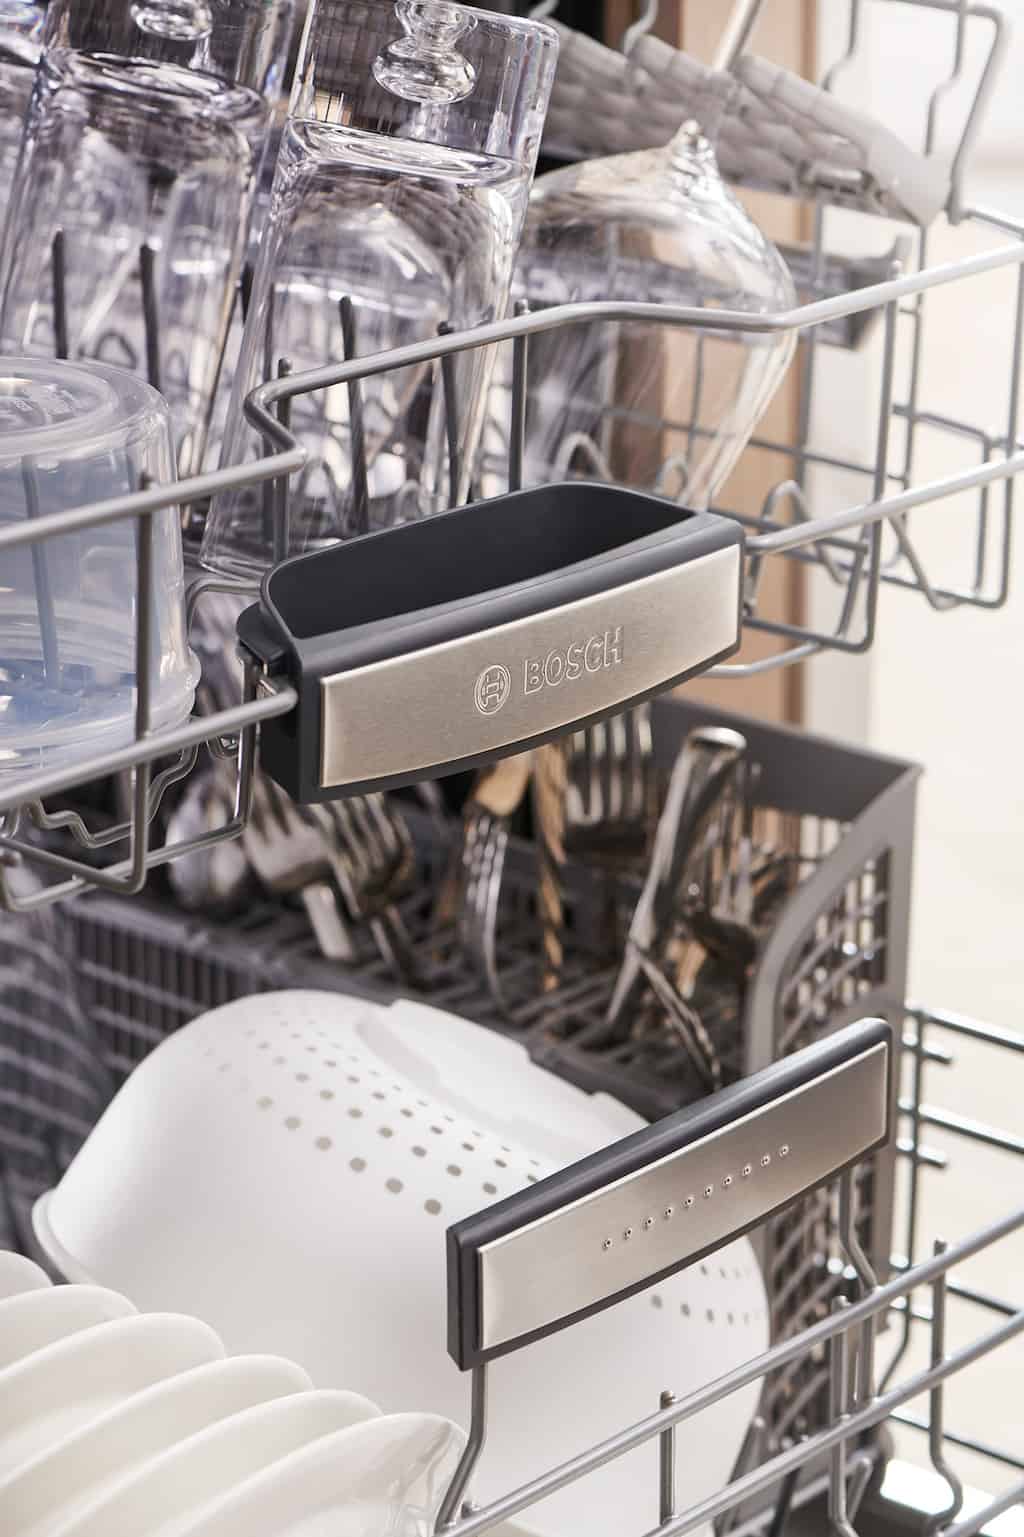 What good is a dishwasher if you have to pre-wash your dishes before you put them in the dishwasher? Check out the new Bosch 800 Series Dishwasher at Best Buy!